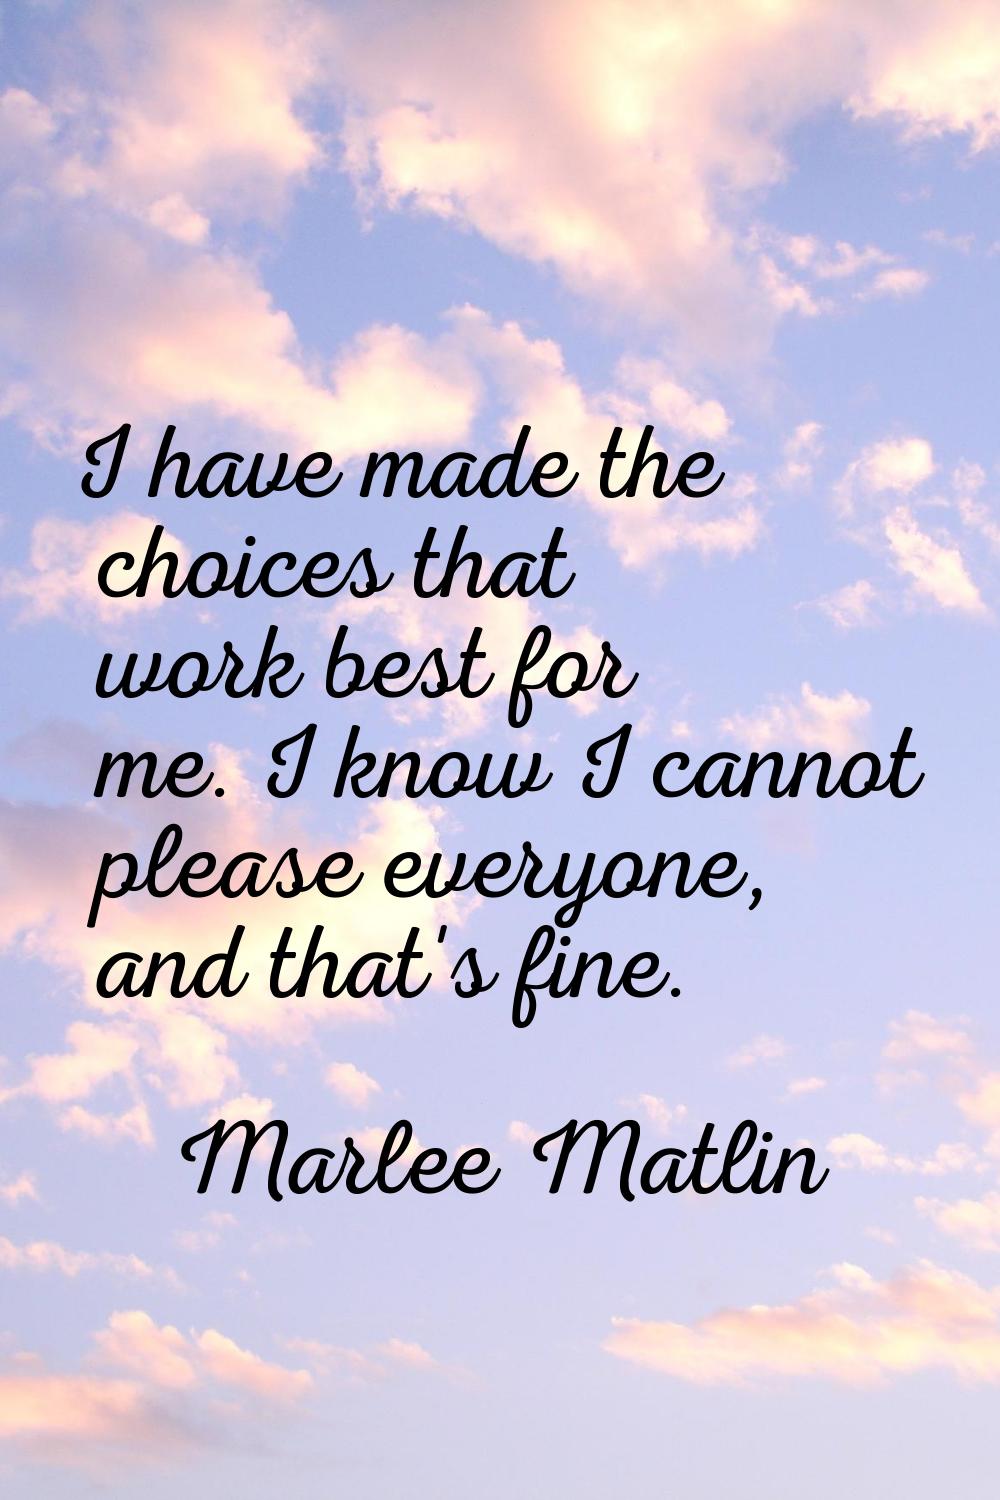 I have made the choices that work best for me. I know I cannot please everyone, and that's fine.